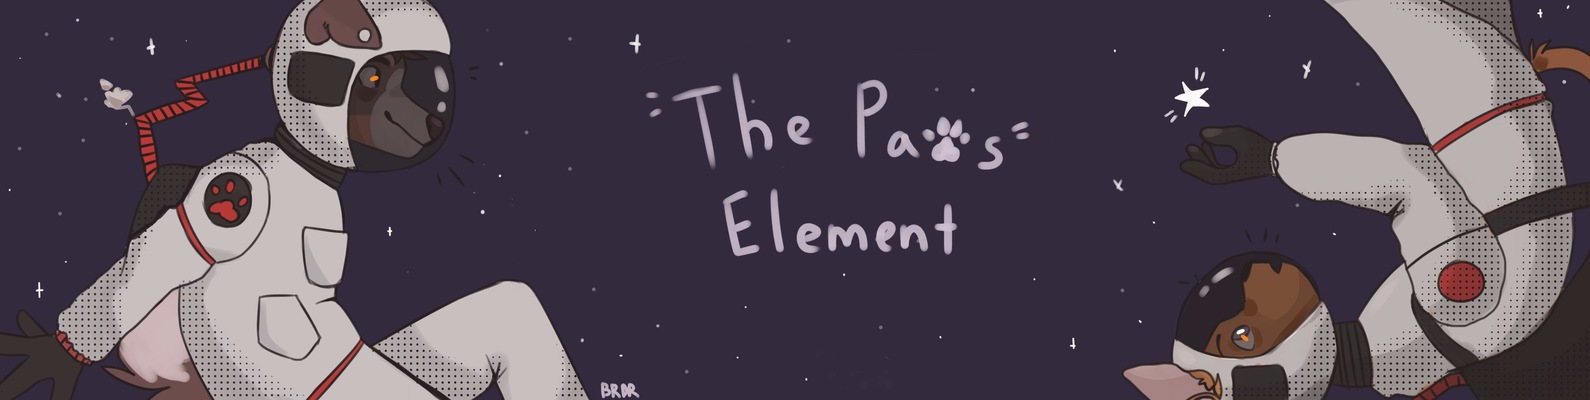 The paw's element. The Paws element. Мы фурри! The Paws element. The Paws element концерт. The Paws element мерч.